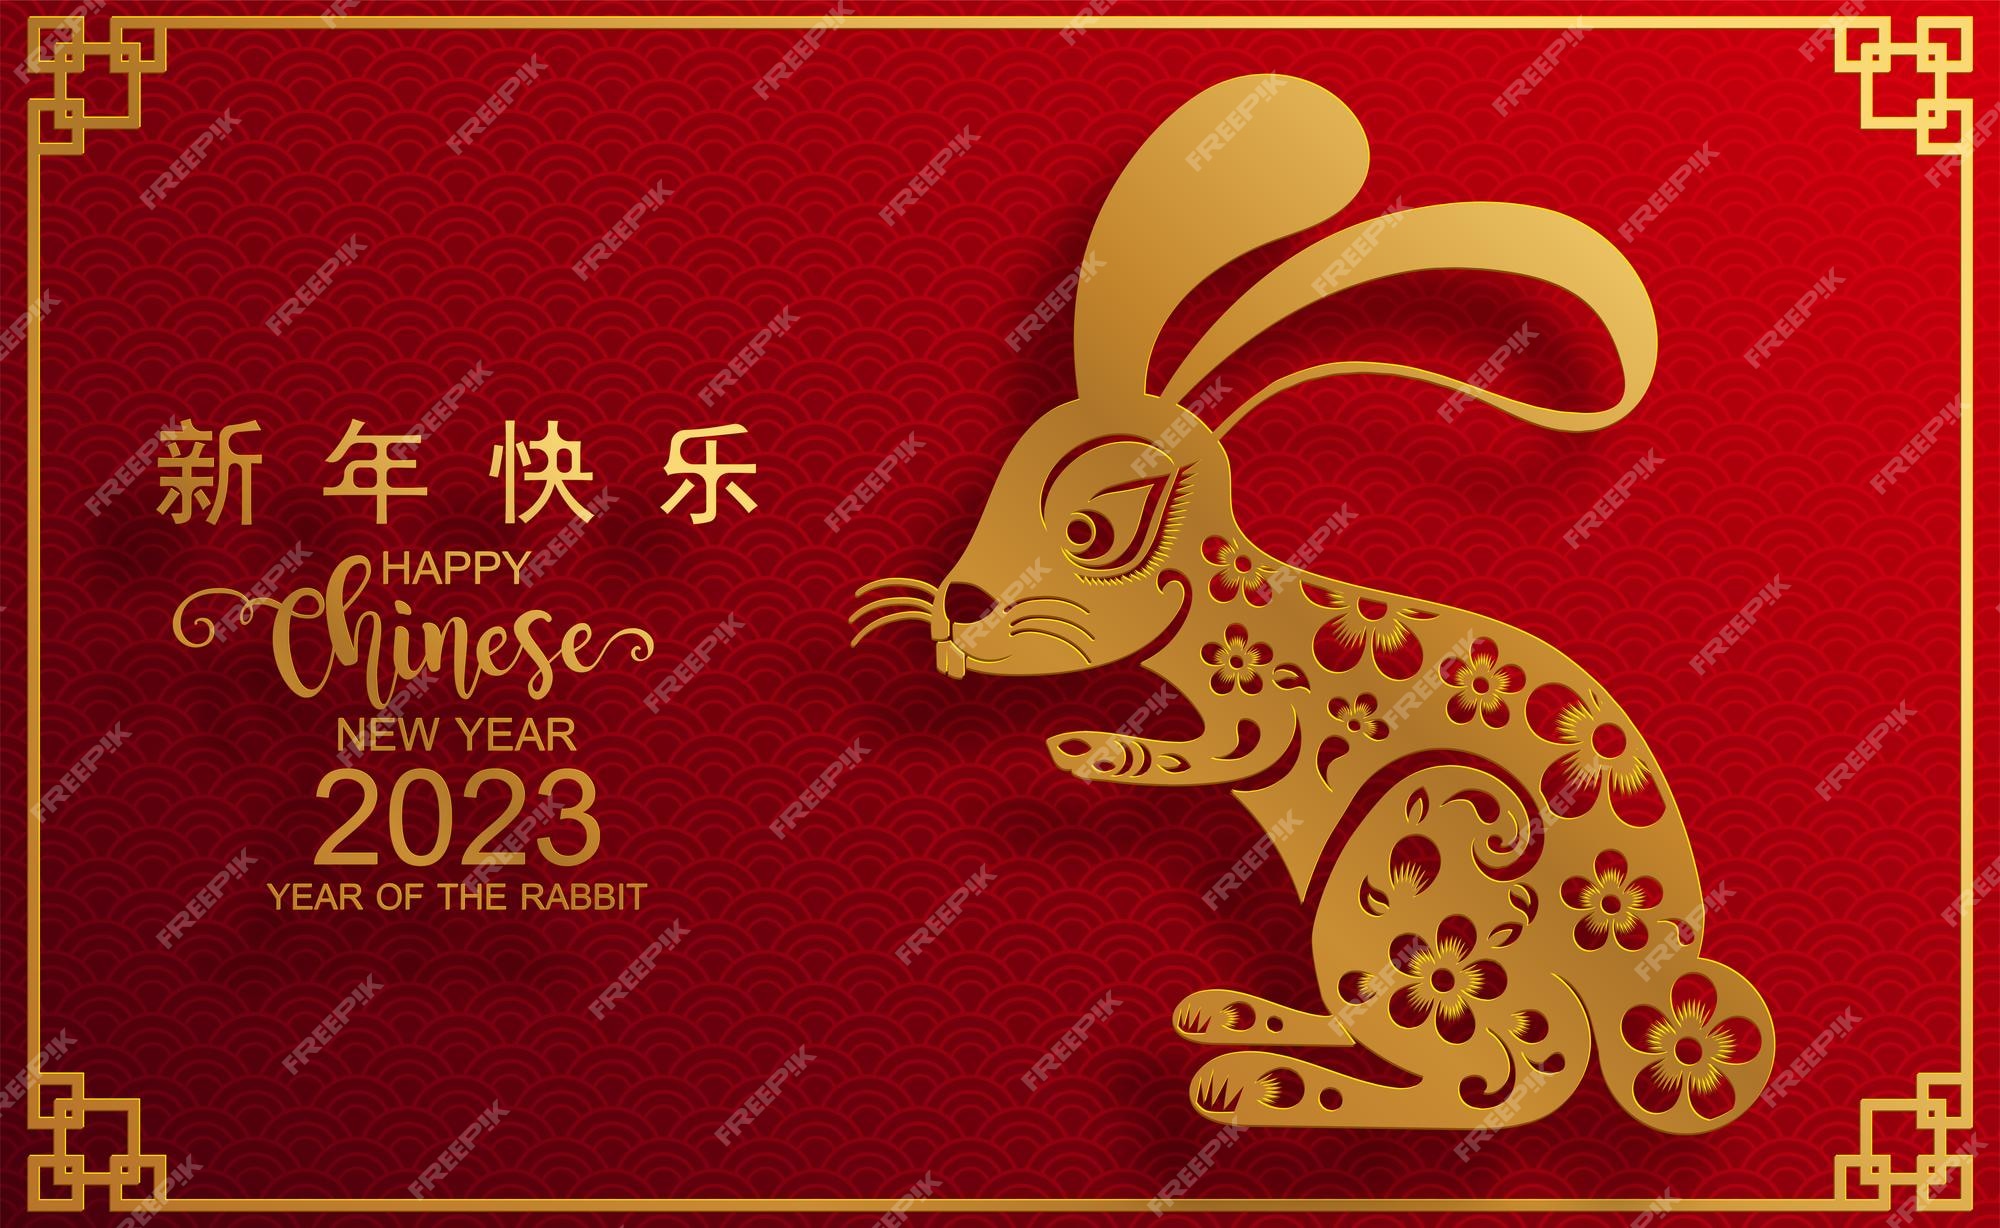 Premium Vector Happy chinese new year 2023 gong xi fa cai year of the